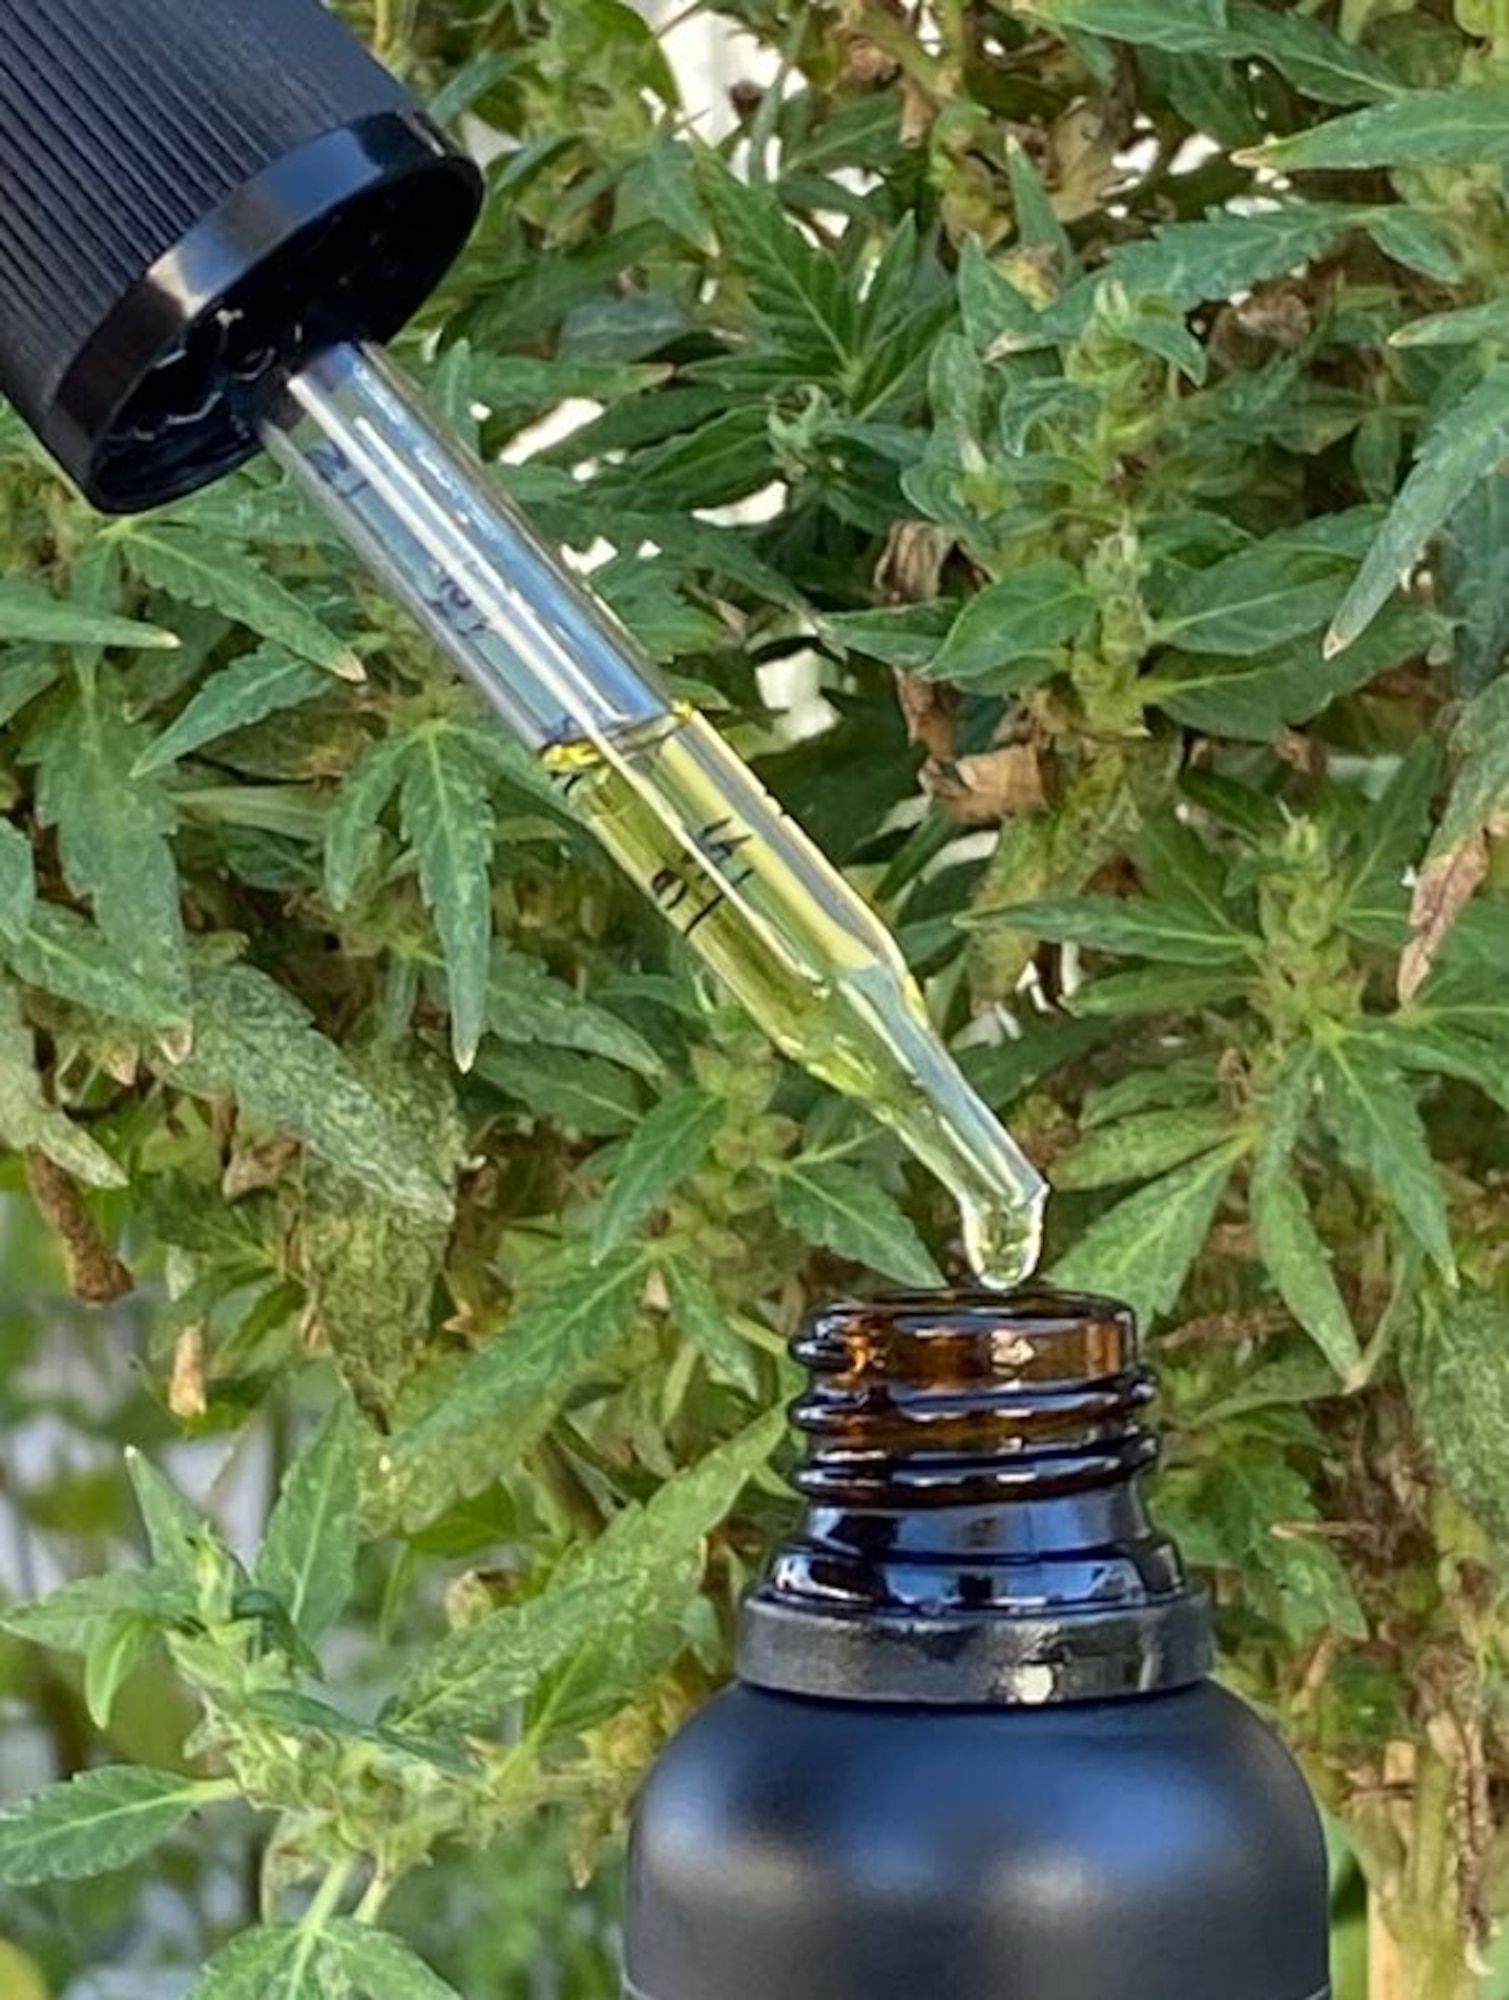 CBD oil is derived from the Cannabis sativa (hemp/marijuana) plant. The Department of Defense has a zero-tolerance policy on the use of all CBD products by Airmen/Defense Department employees. (U.S. Air Force photo by Linda Welz)